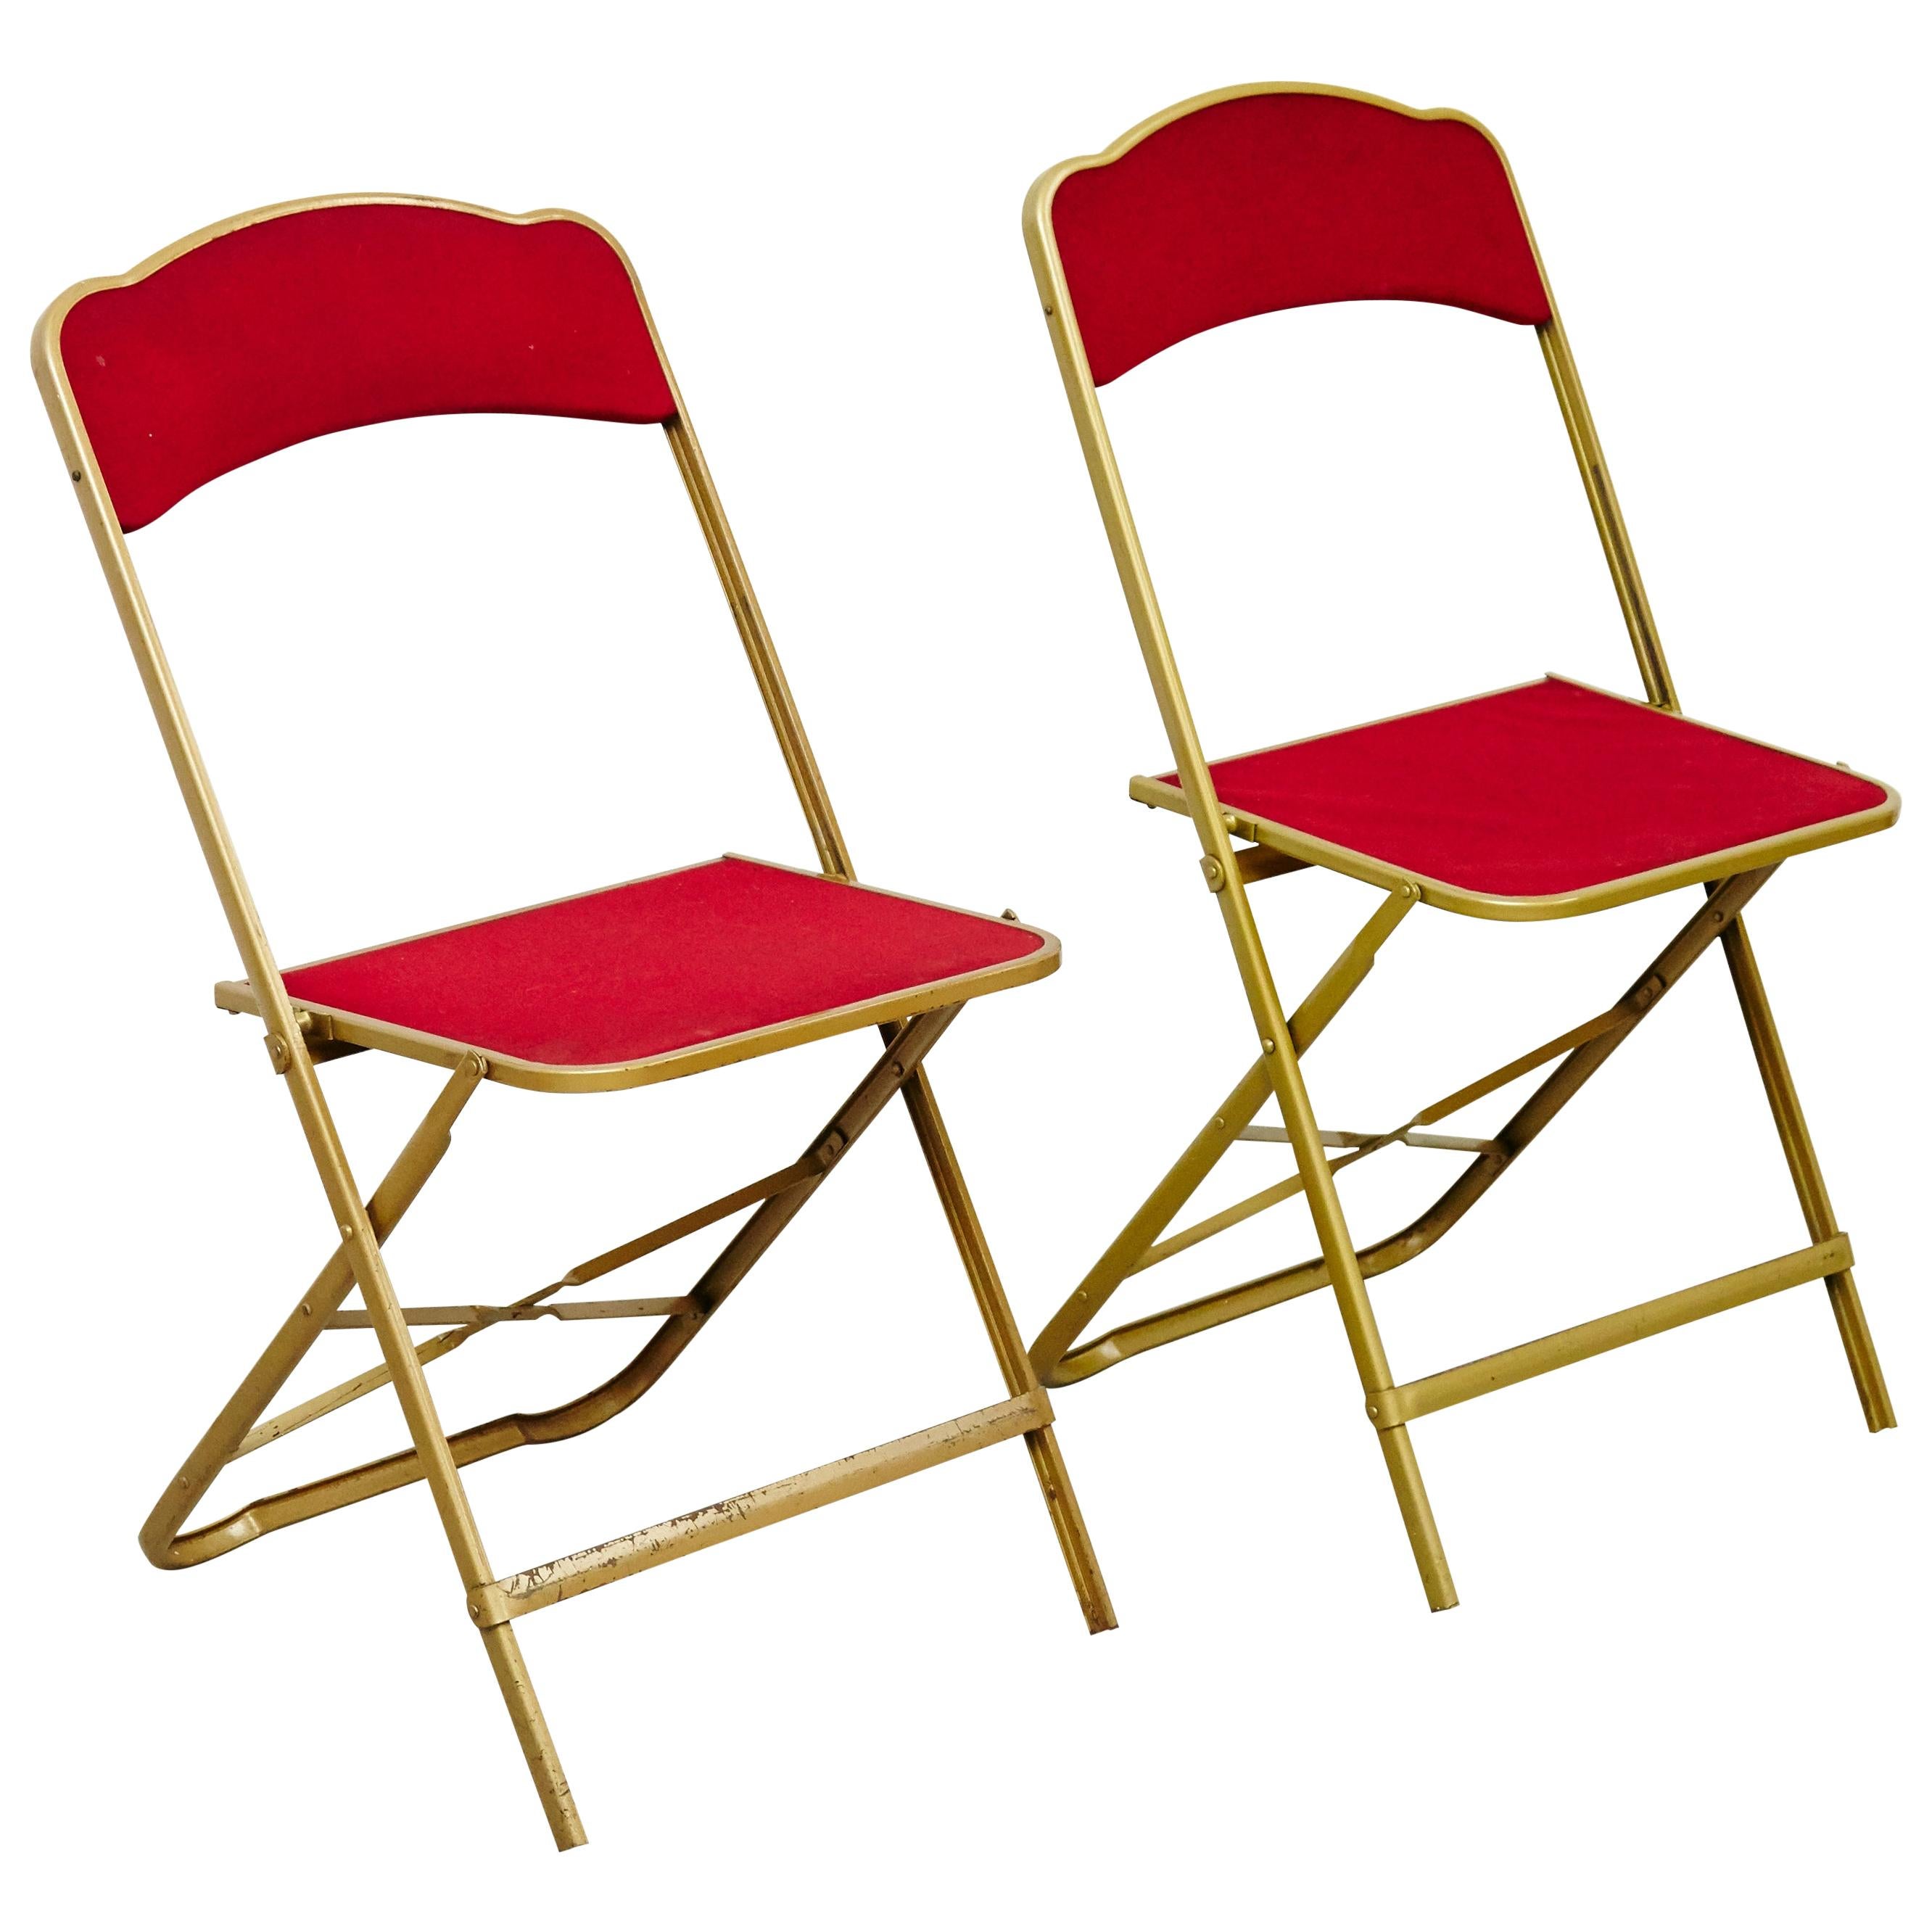 Pair of Antique French Folding Theater Chairs, circa 1960